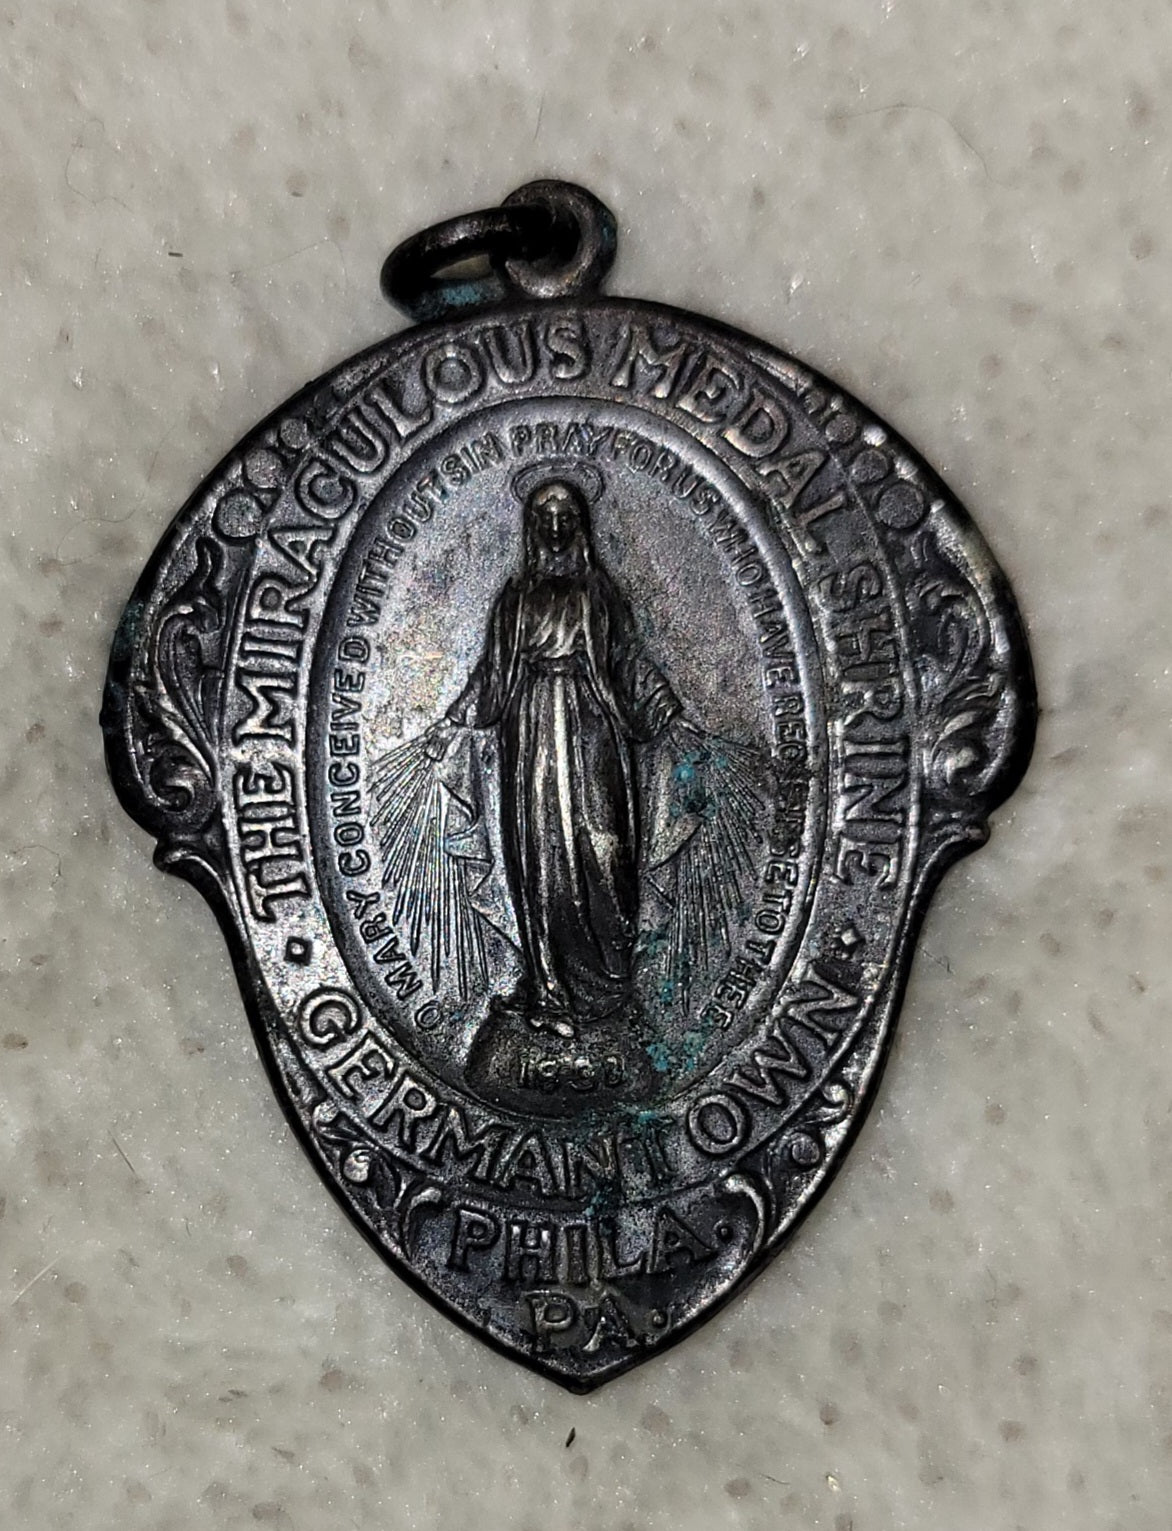 Antique medal The Miraculous Medal Shrine Pendant Germantown PA revealed to St. Catherine Labouré at the Rue de Bac Chapel in 1830 by the Virgin Mary herself. Front view.